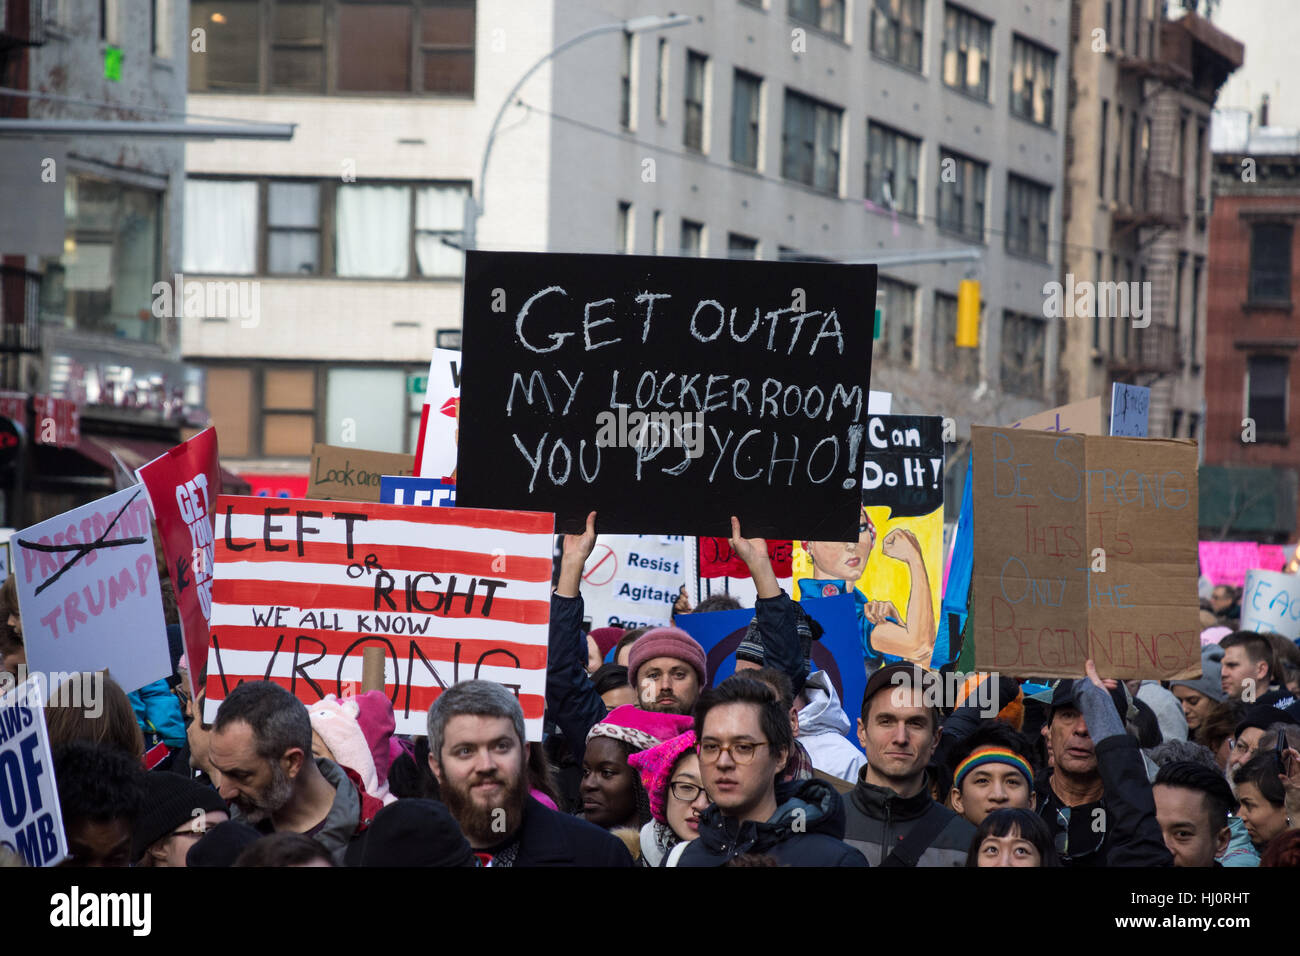 New York, NY, USA. 21st January 2017. Women's March on NYC.  A protester carries a sign reading 'get outta my lockerroom you psycho!' during the march. Credit: Matthew Cherchio/Alamy Live News Stock Photo